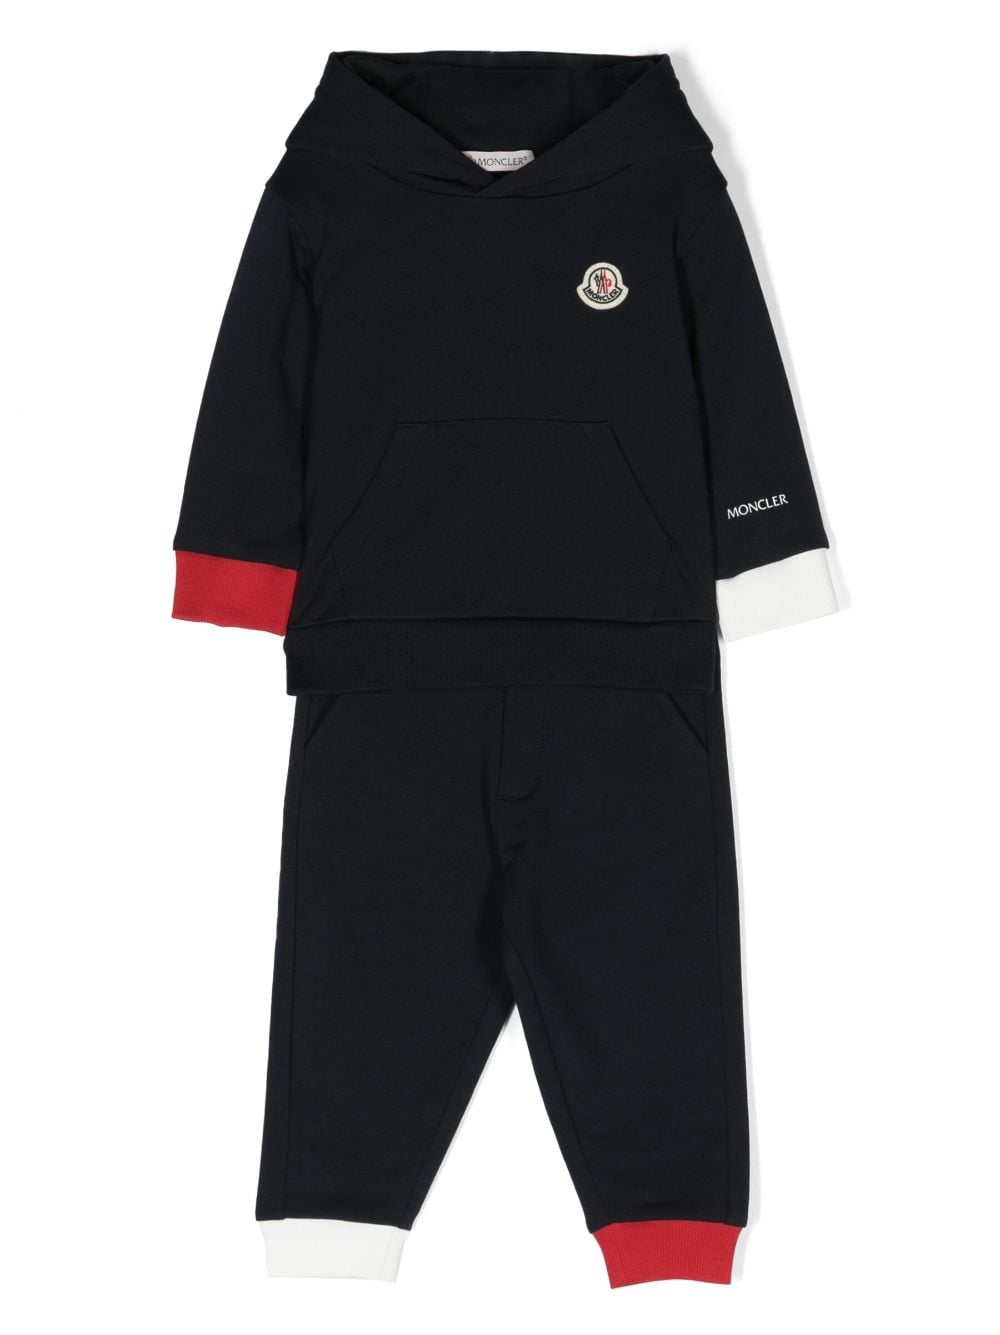 Navy blue sports outfit for newborns